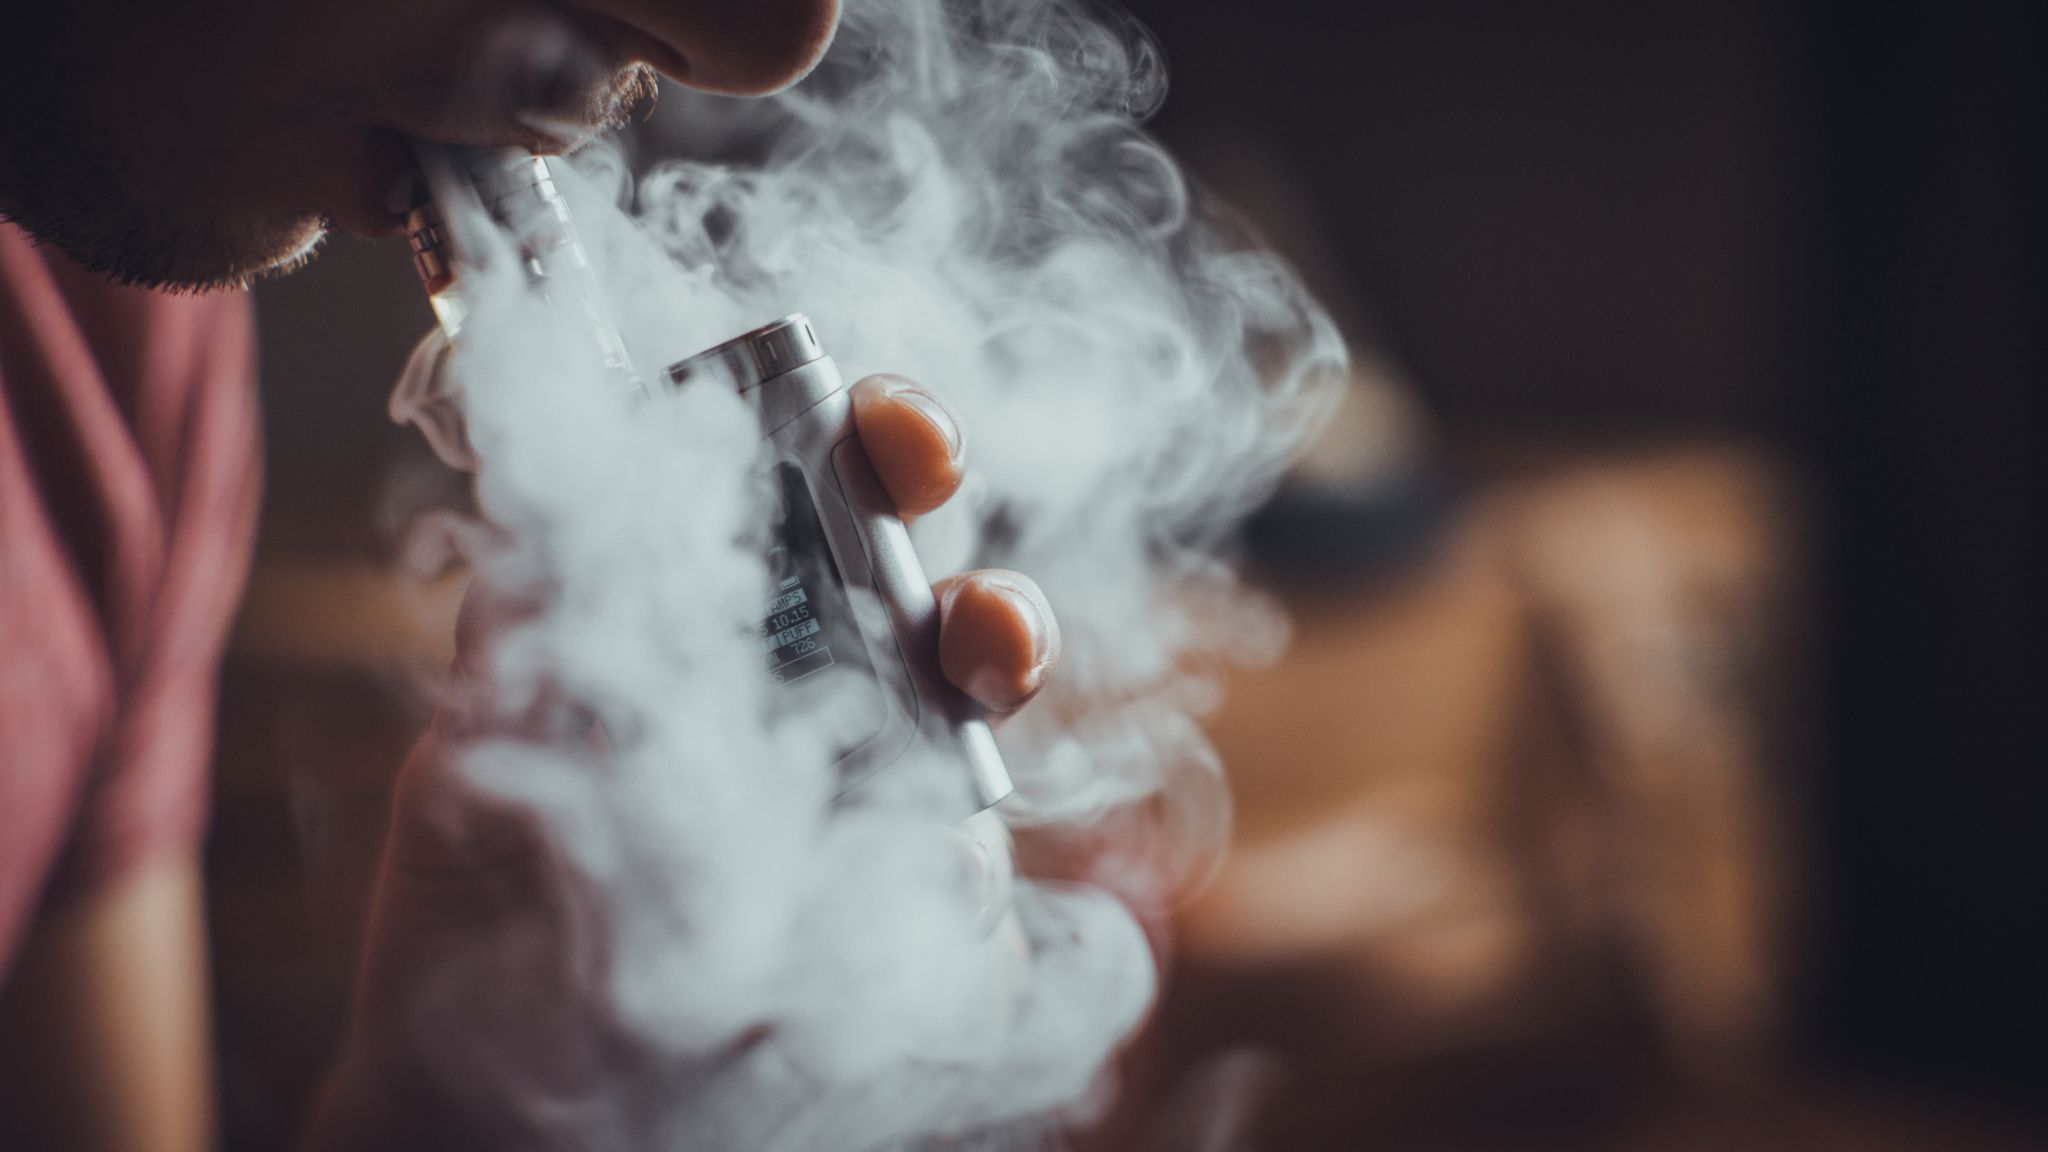 Texas records 1st death linked to e-cigarette use